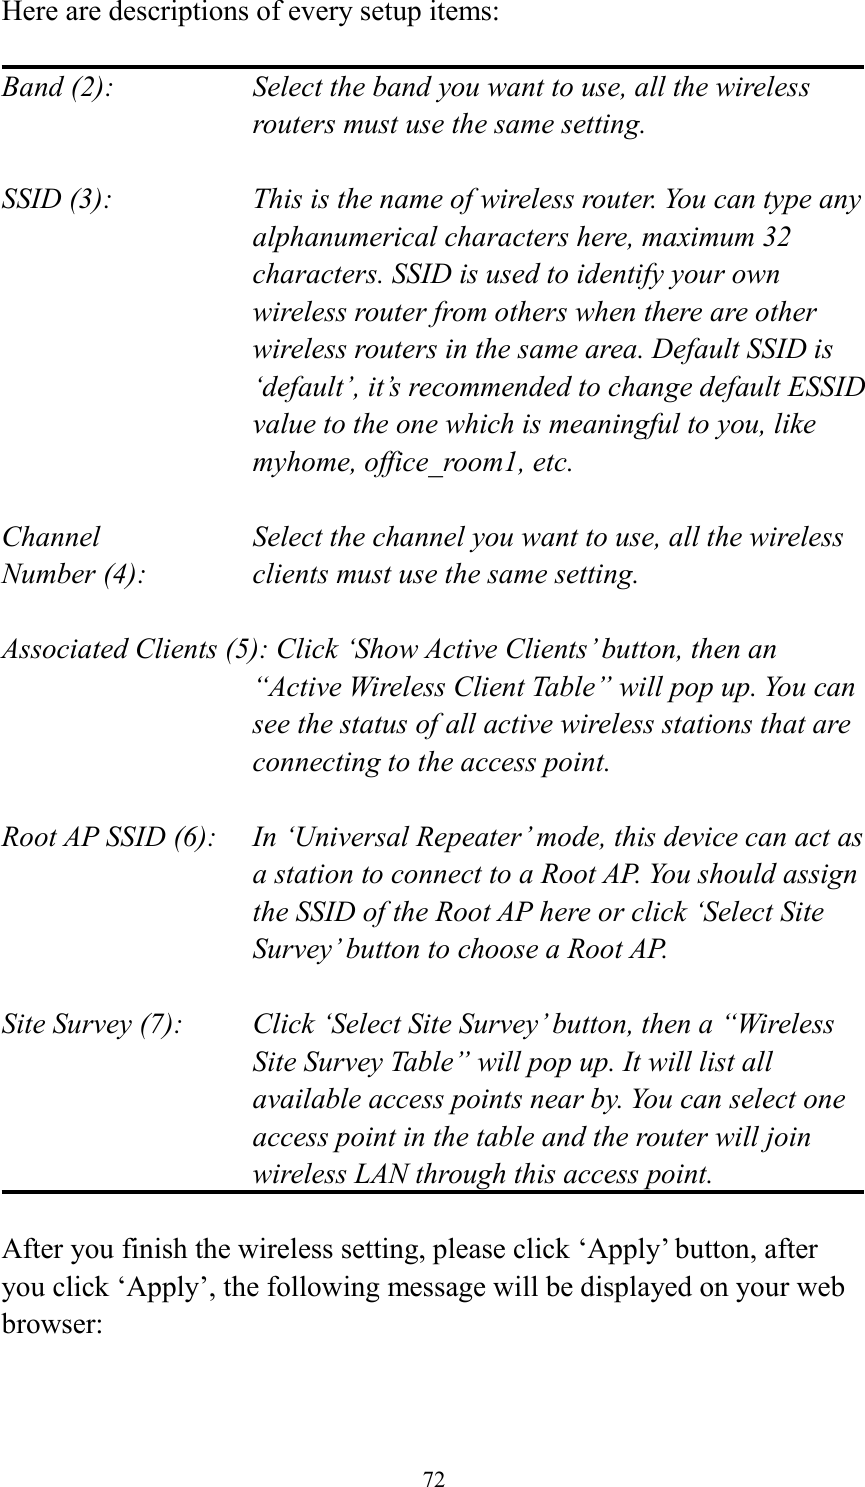 72 Here are descriptions of every setup items:  Band (2):  Select the band you want to use, all the wireless routers must use the same setting.  SSID (3):  This is the name of wireless router. You can type any alphanumerical characters here, maximum 32 characters. SSID is used to identify your own wireless router from others when there are other wireless routers in the same area. Default SSID is ‘default’, it’s recommended to change default ESSID value to the one which is meaningful to you, like myhome, office_room1, etc.  Channel  Select the channel you want to use, all the wireless Number (4):  clients must use the same setting.  Associated Clients (5): Click ‘Show Active Clients’ button, then an “Active Wireless Client Table” will pop up. You can see the status of all active wireless stations that are connecting to the access point.  Root AP SSID (6):  In ‘Universal Repeater’ mode, this device can act as a station to connect to a Root AP. You should assign the SSID of the Root AP here or click ‘Select Site Survey’ button to choose a Root AP.  Site Survey (7):  Click ‘Select Site Survey’ button, then a “Wireless Site Survey Table” will pop up. It will list all available access points near by. You can select one access point in the table and the router will join wireless LAN through this access point.  After you finish the wireless setting, please click ‘Apply’ button, after you click ‘Apply’, the following message will be displayed on your web browser:  